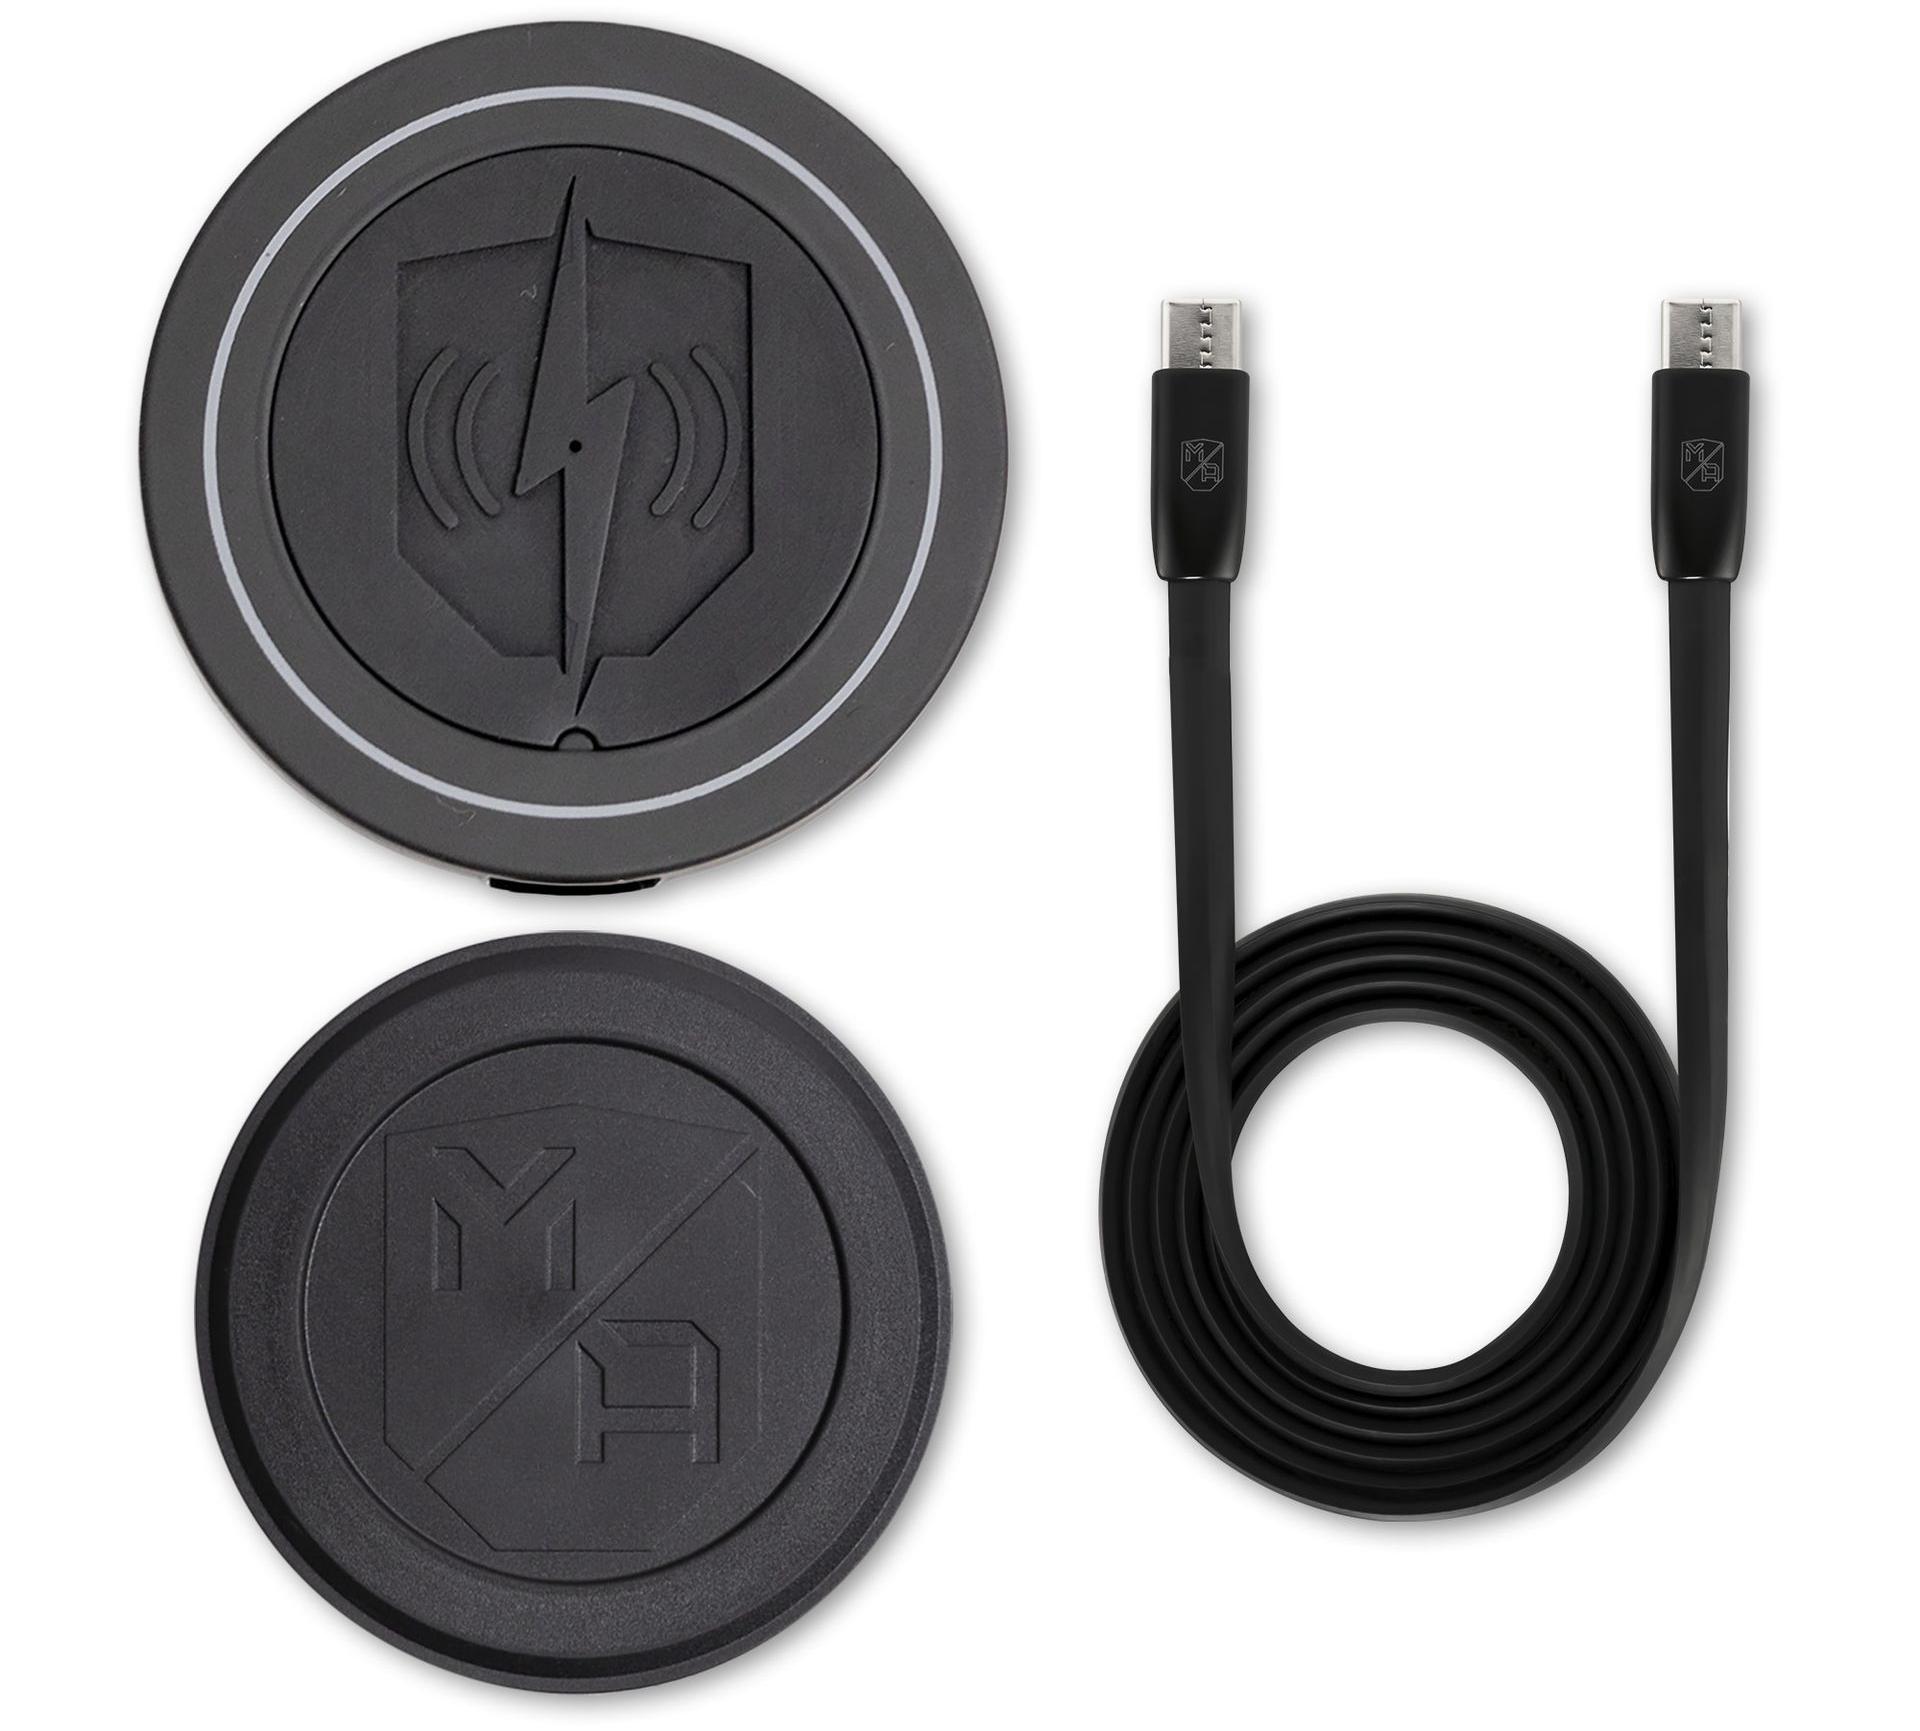 FLEX Magnetic Wireless charger with FLEX Plate and USB-C cable